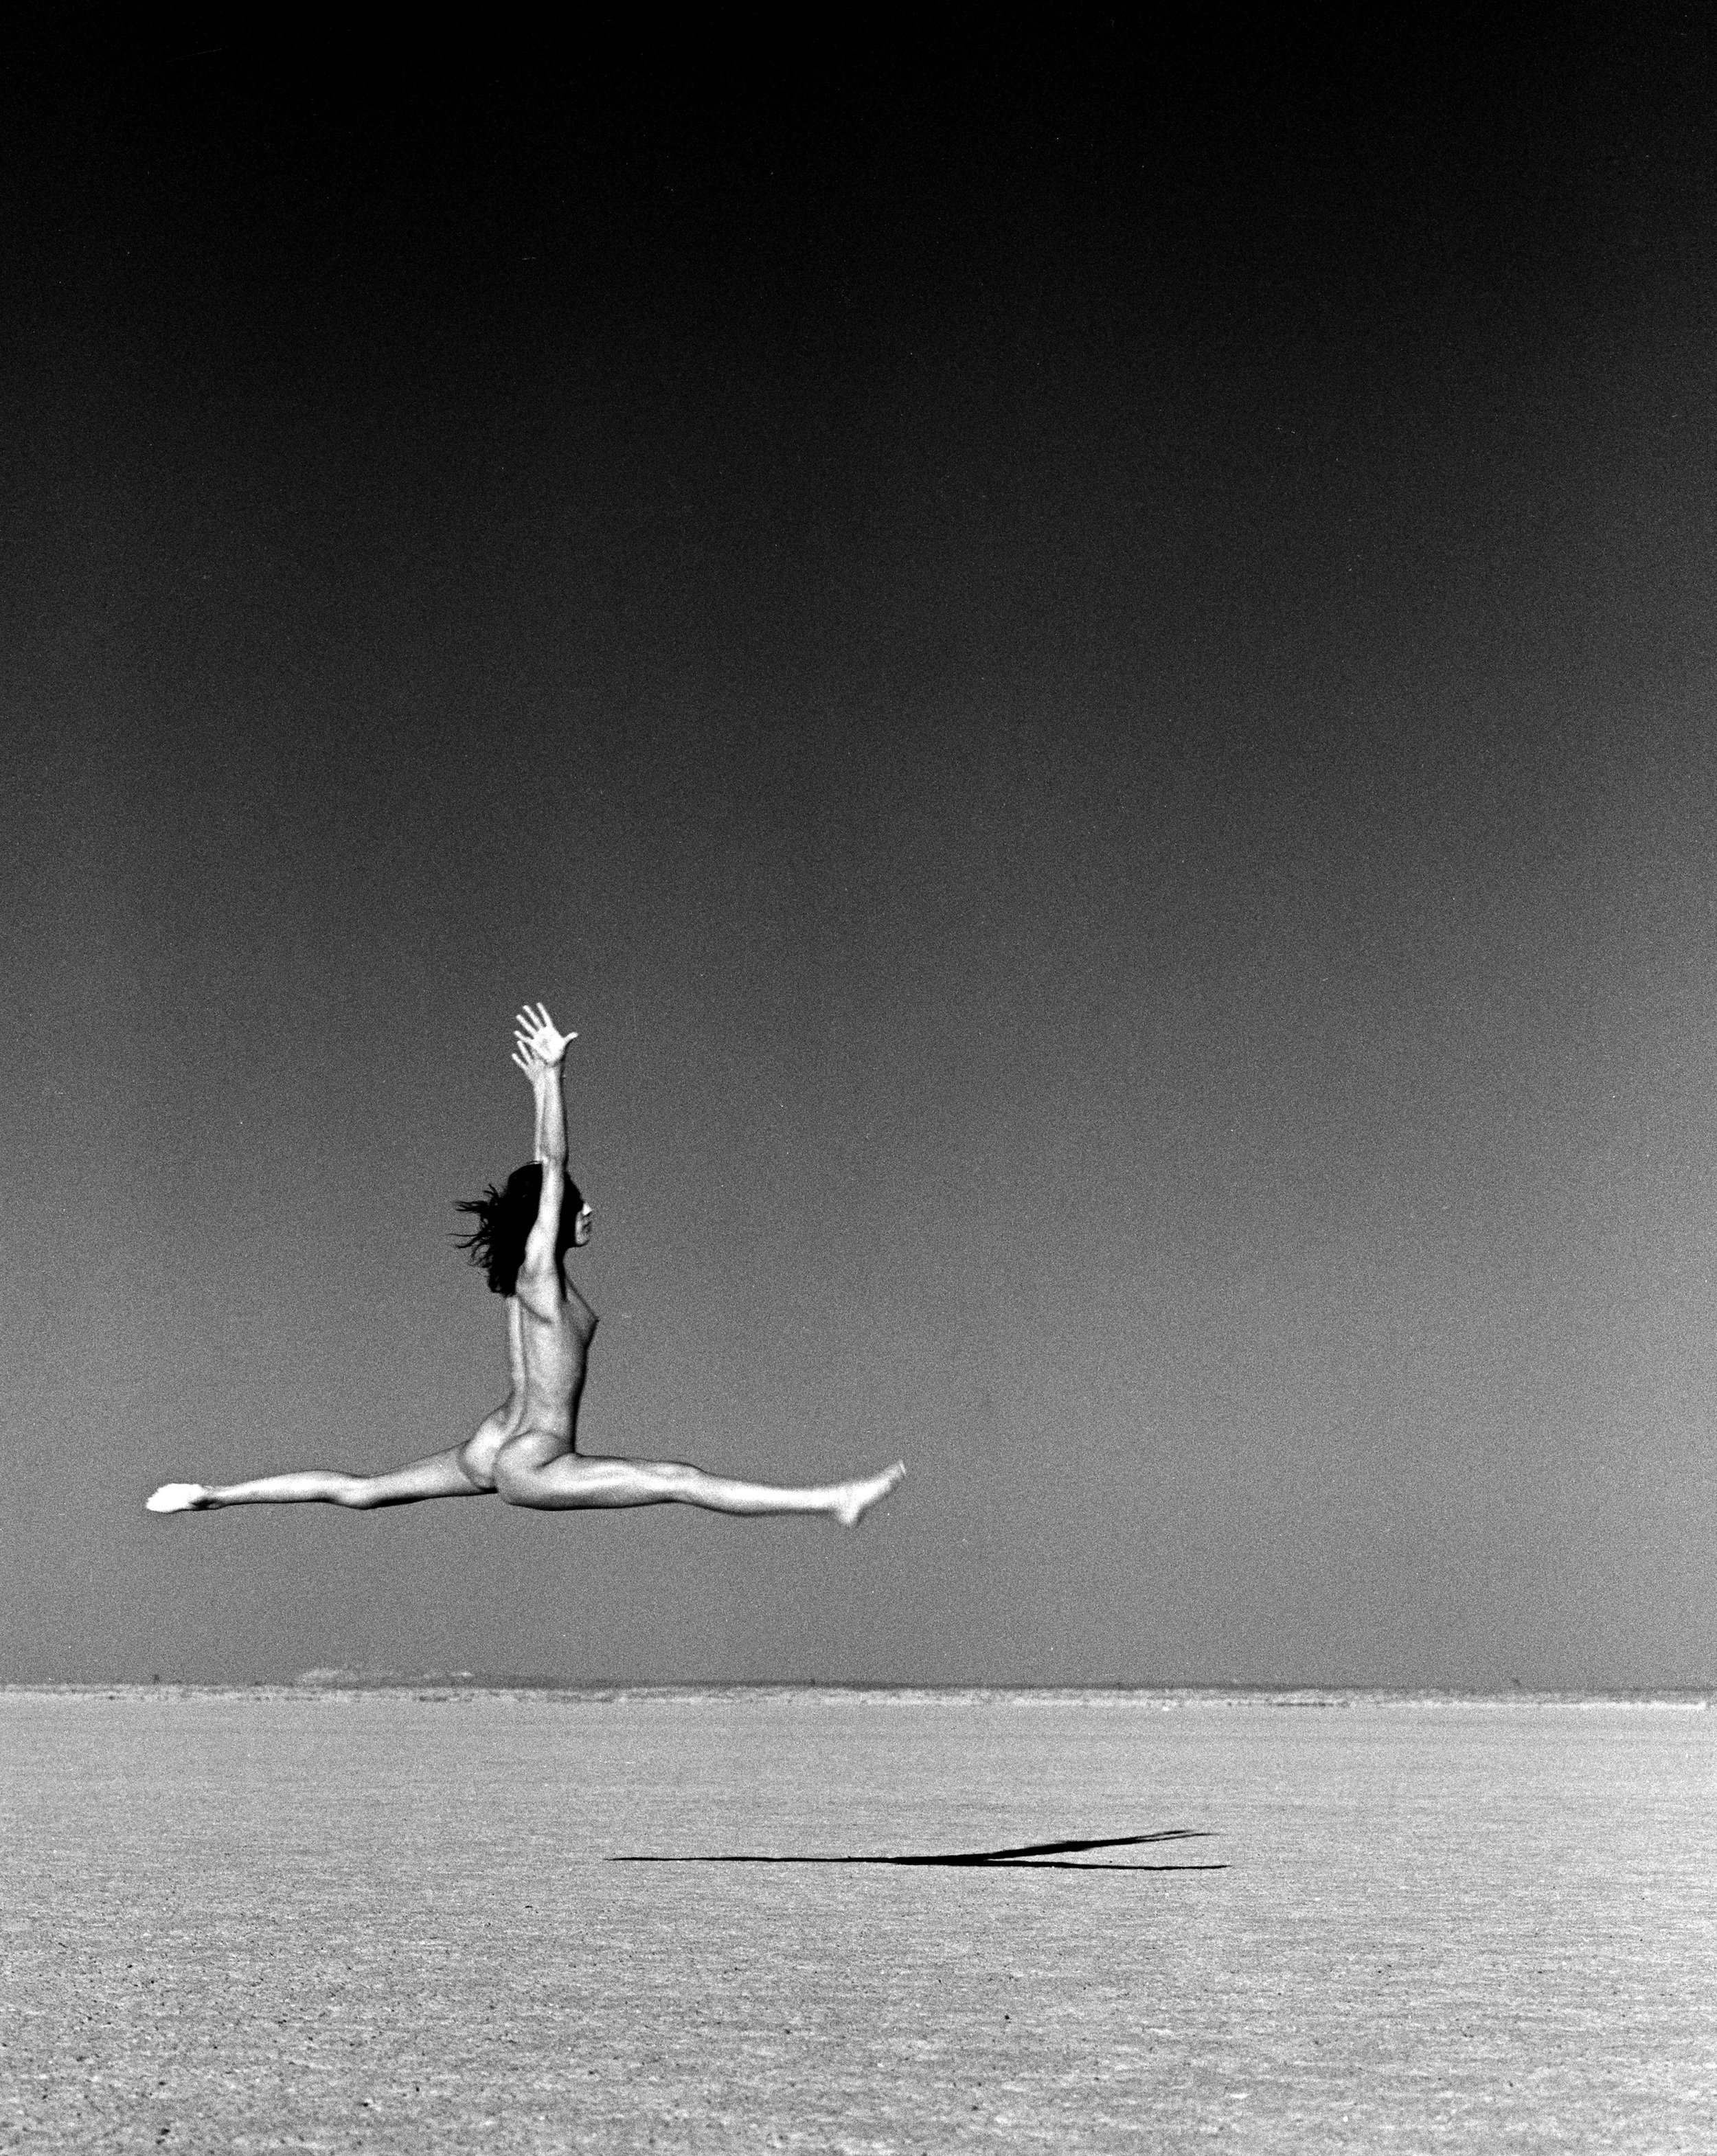  Michael Haber   Desert ballet,  2000  100% Archival fine art print    Small: 40 x 30 in. Editions of 20, 25 and 30  Medium: 60 x 40 in. Editions of 20 and 25  Large: 70 X 50 in. Editions of 15 and 20  Extra Large: 96 X 50 in Editions of 10 